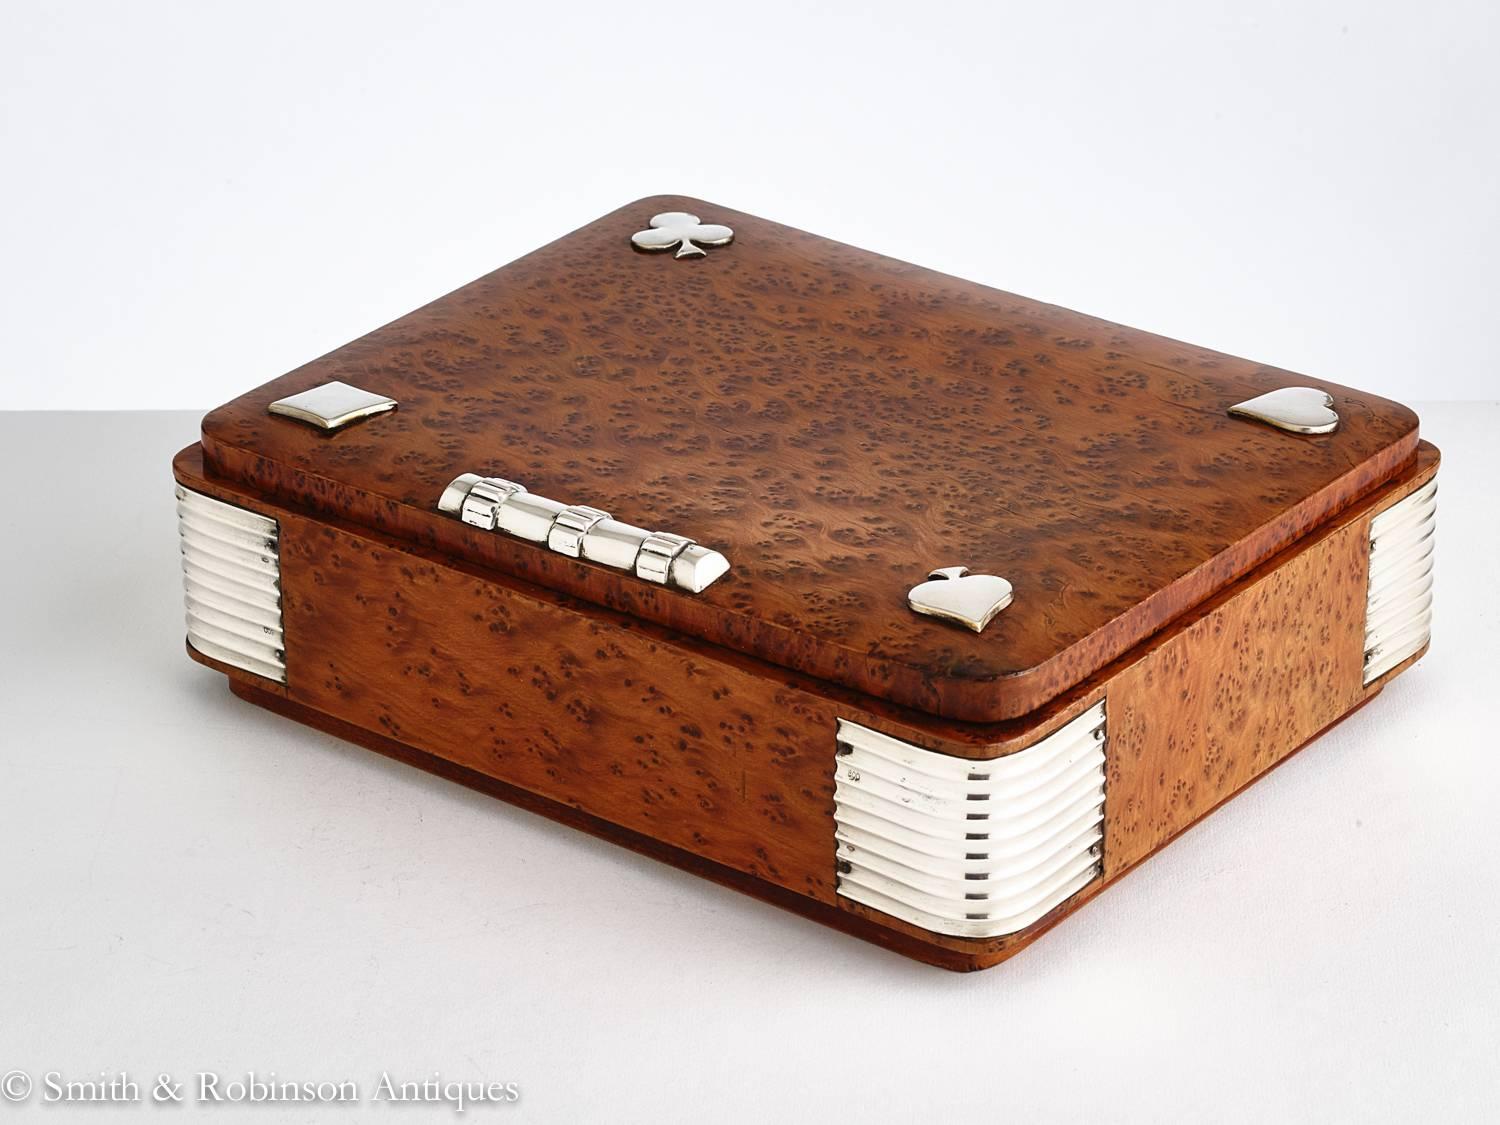 20th Century Art Deco burr walnut games box with applied silver decoration, France, circa 1925.

Stamped 800 silver on the bullnose corners.

The interior has its original pieces but the playing cards have been replaced.

We are always adding to our